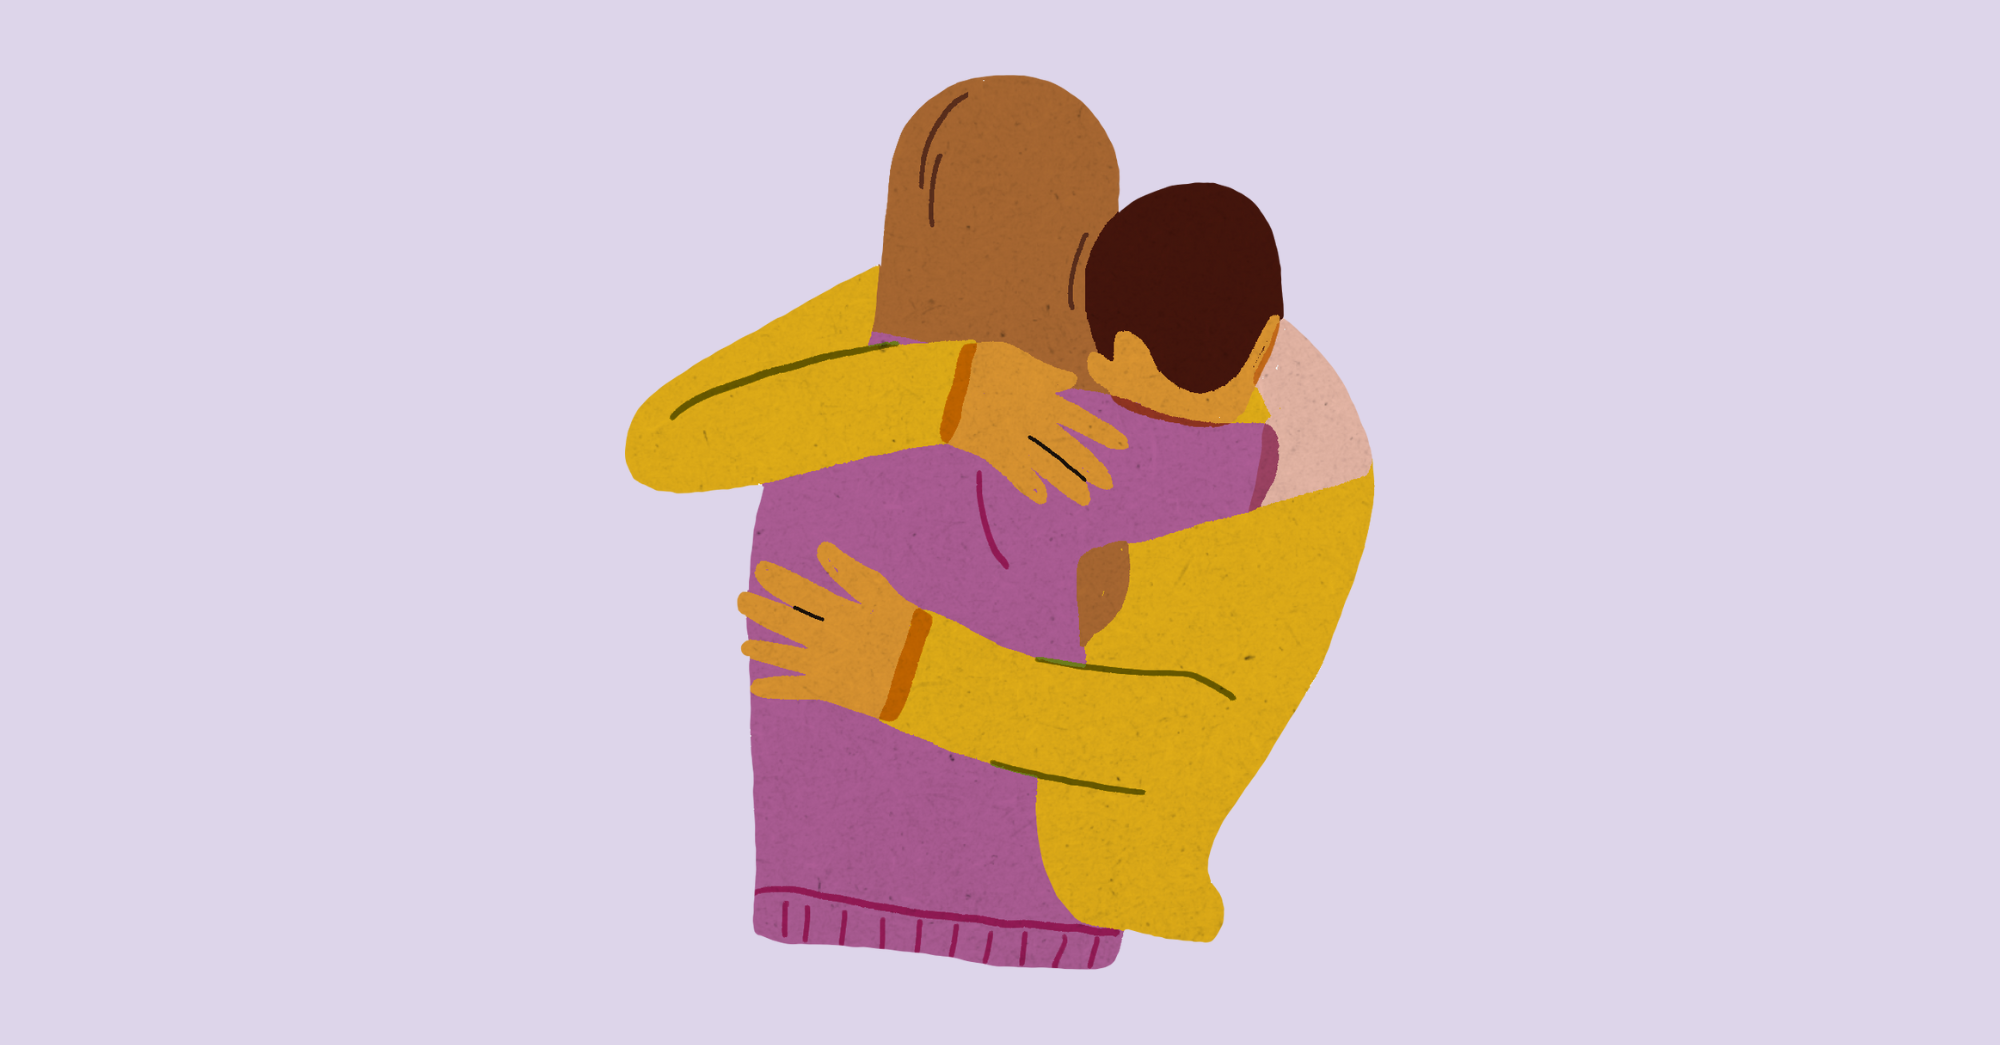 Two people hugging in an embrace